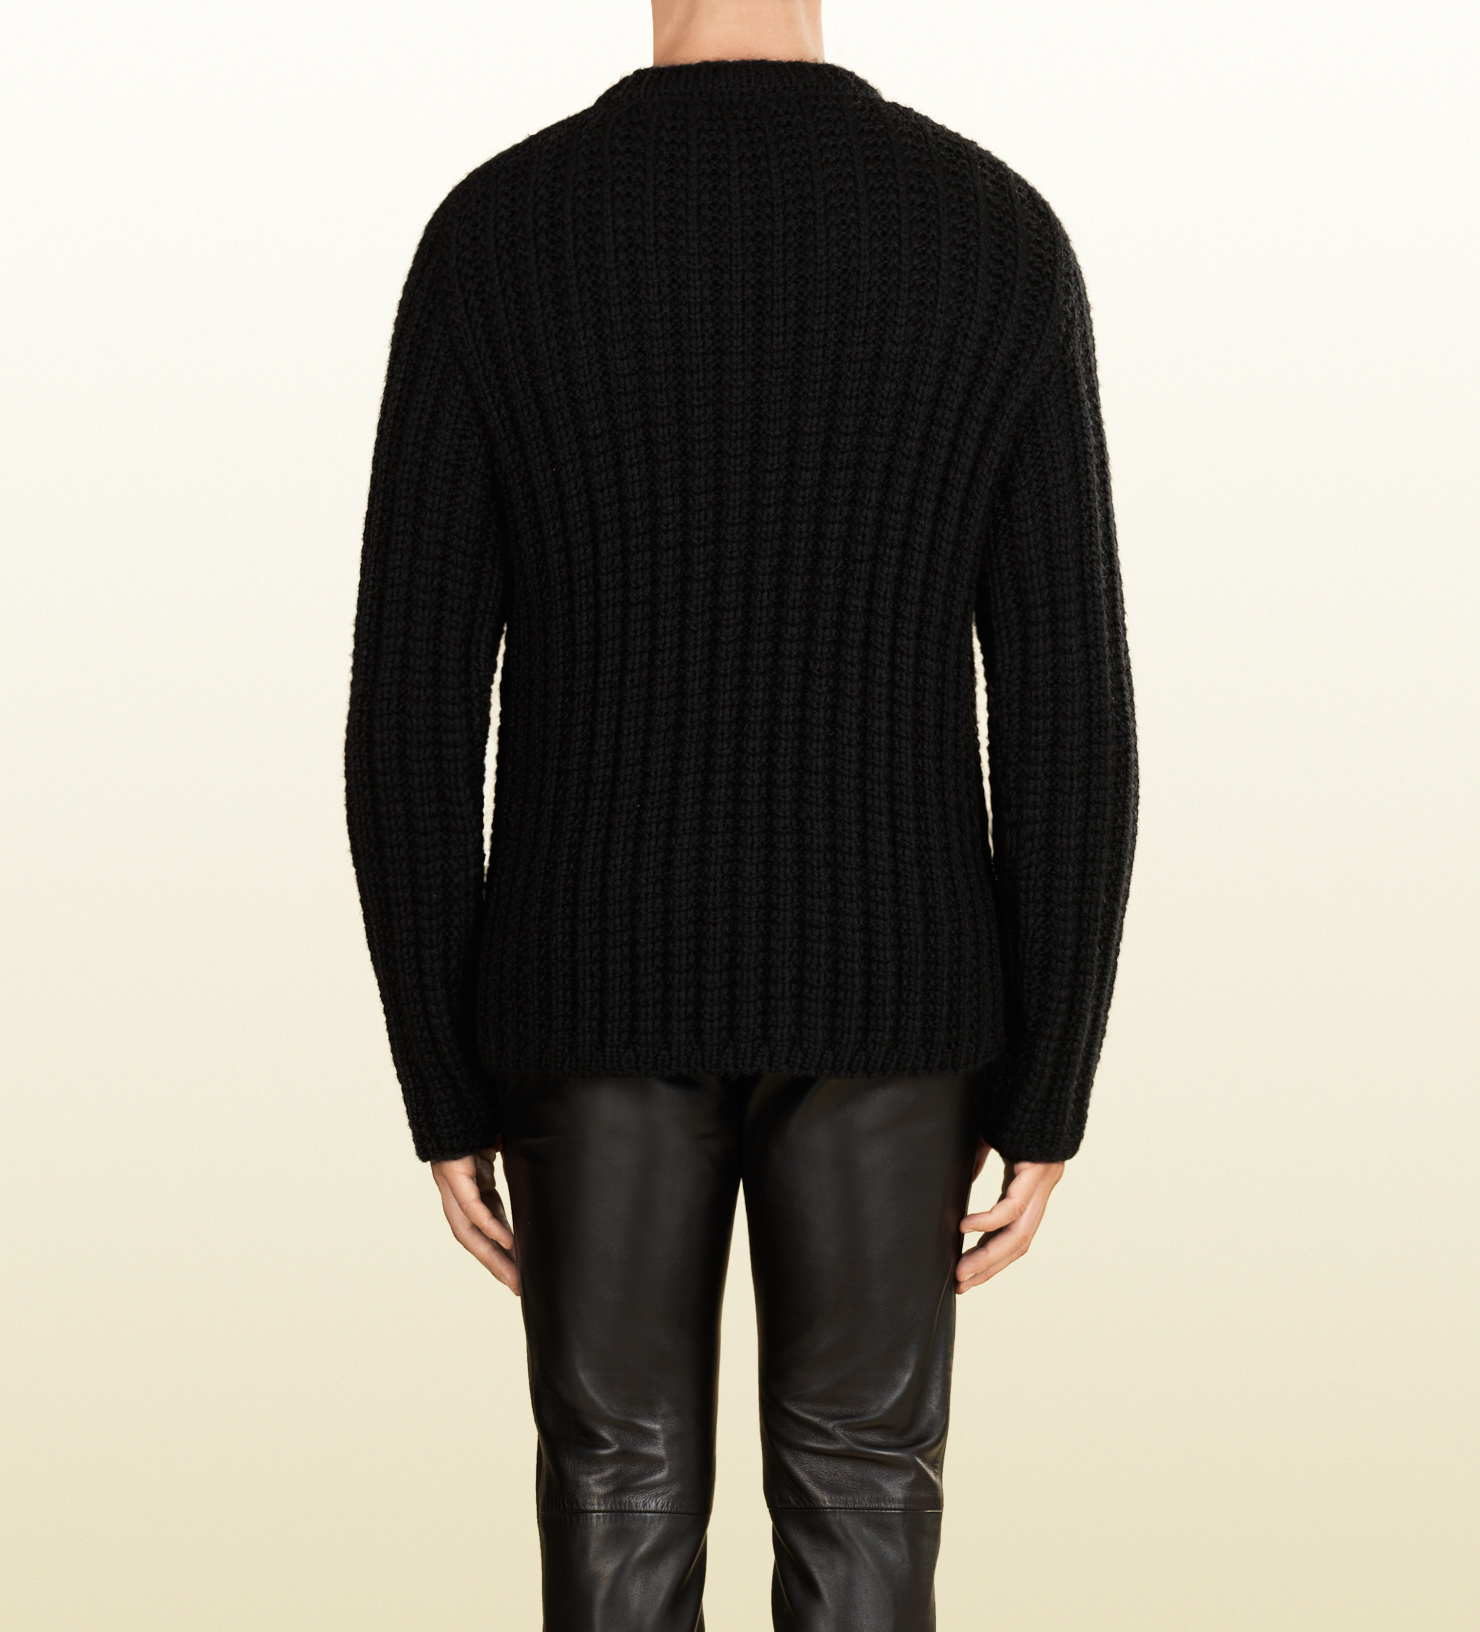 Lyst - Gucci Wool Mohair Sweater with Leather Detail in Black